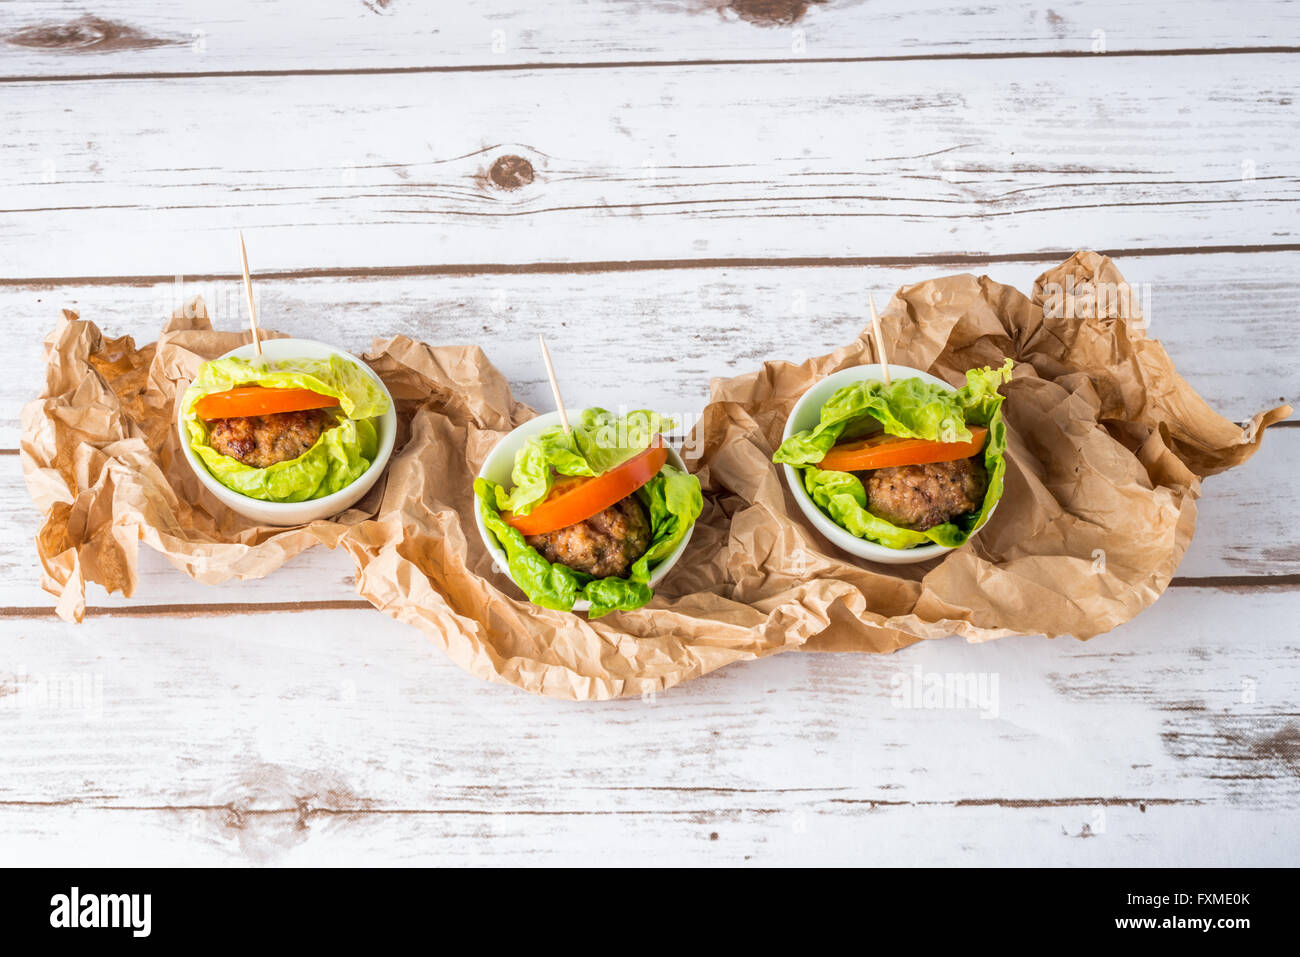 Bunless burger with bun replaced with lettuce leaves Stock Photo